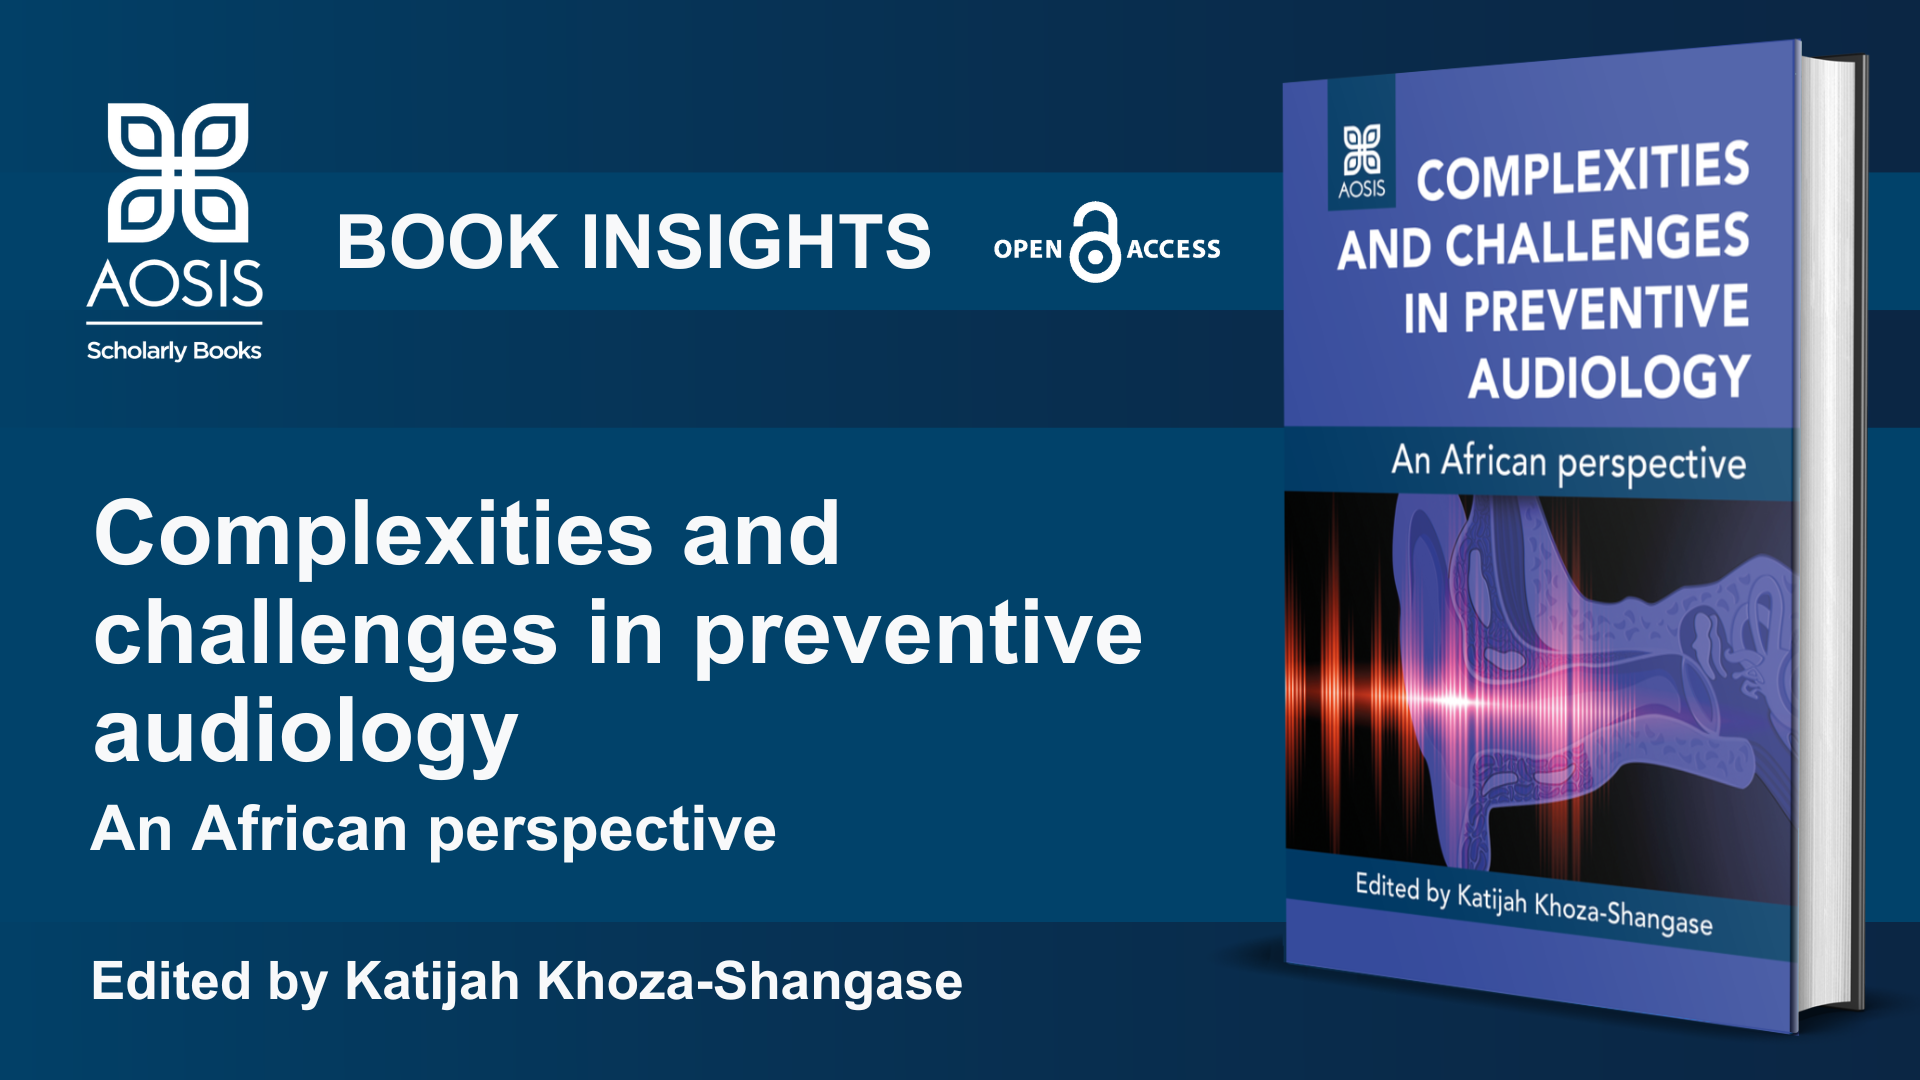 AOSIS Books publishes the open access book ‘Complexities and challenges in preventive audiology: An African perspective’ 